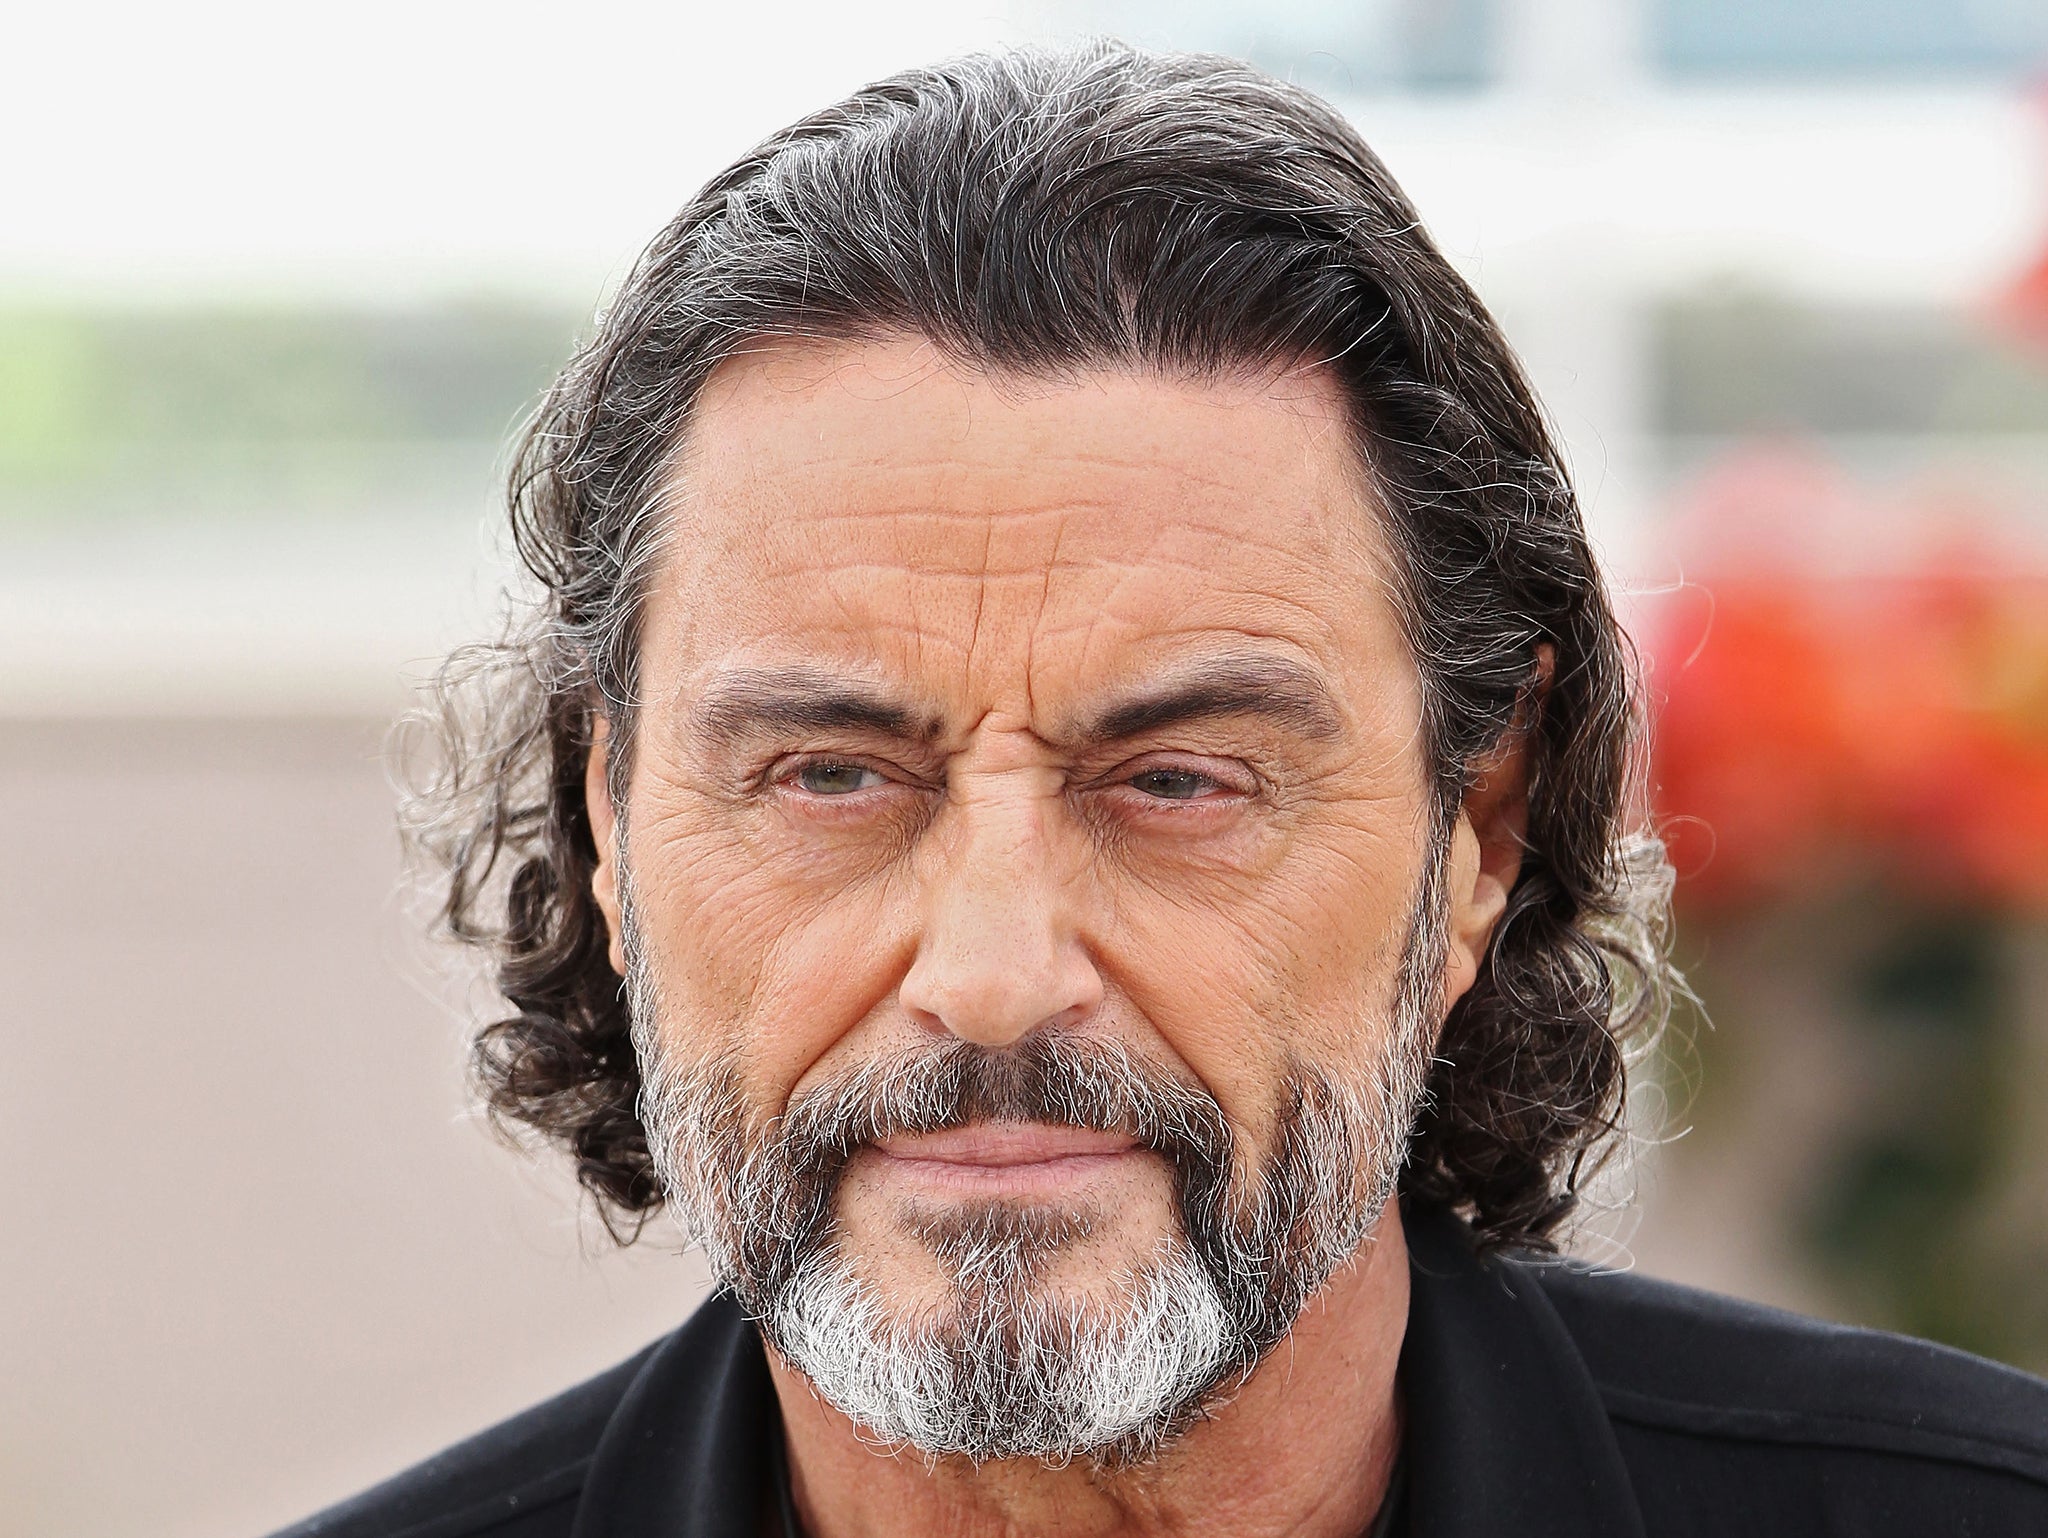 Actor Ian McShane attends the 64th Cannes Film Festival